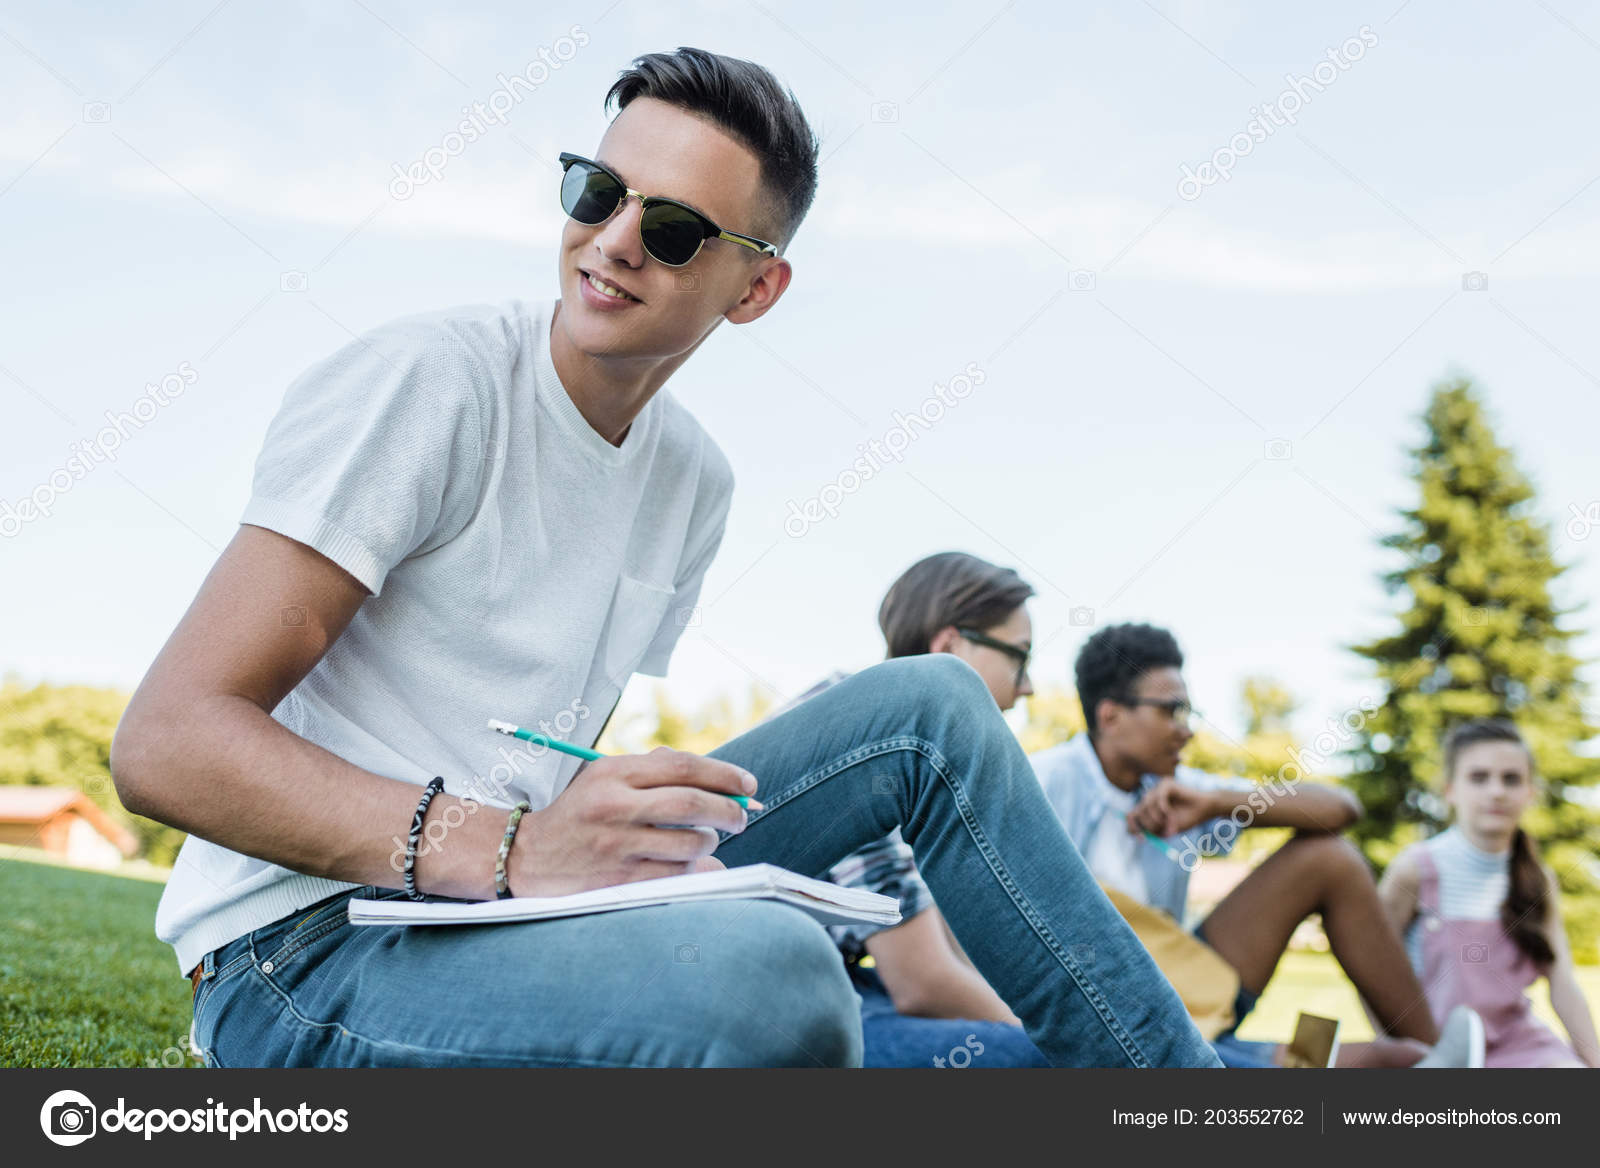 Smiling Teenage Boy Sunglasses Taking Notes Looking Away While